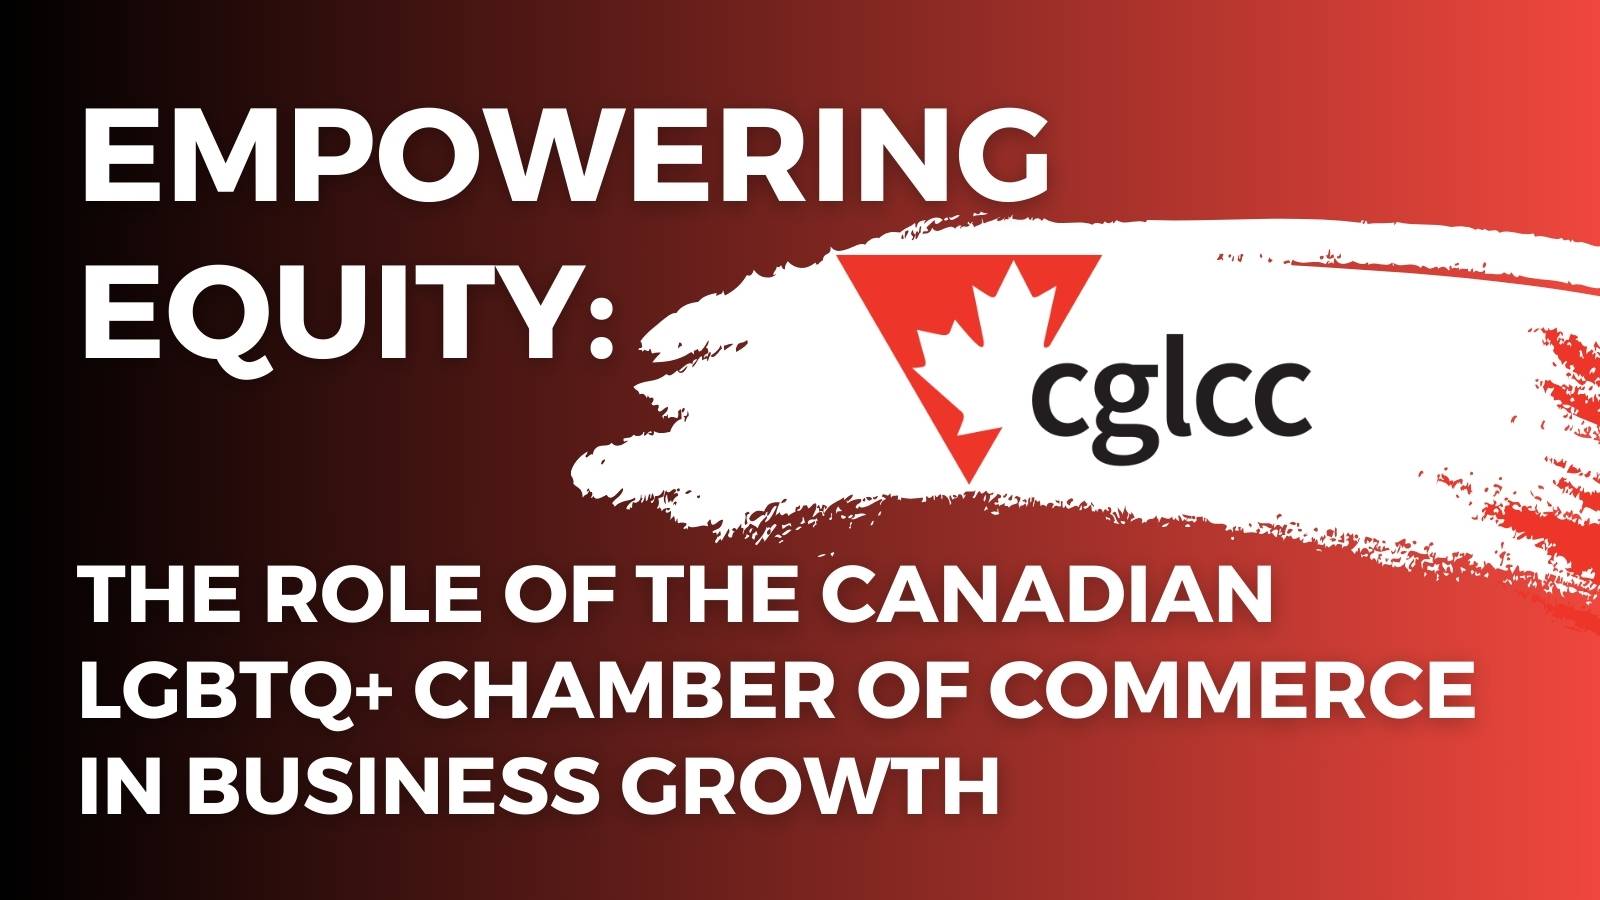 Empowering Equity The Role of the Canadian LGBTQ+ Chamber of Commerce in Business Growth (CGLCC)